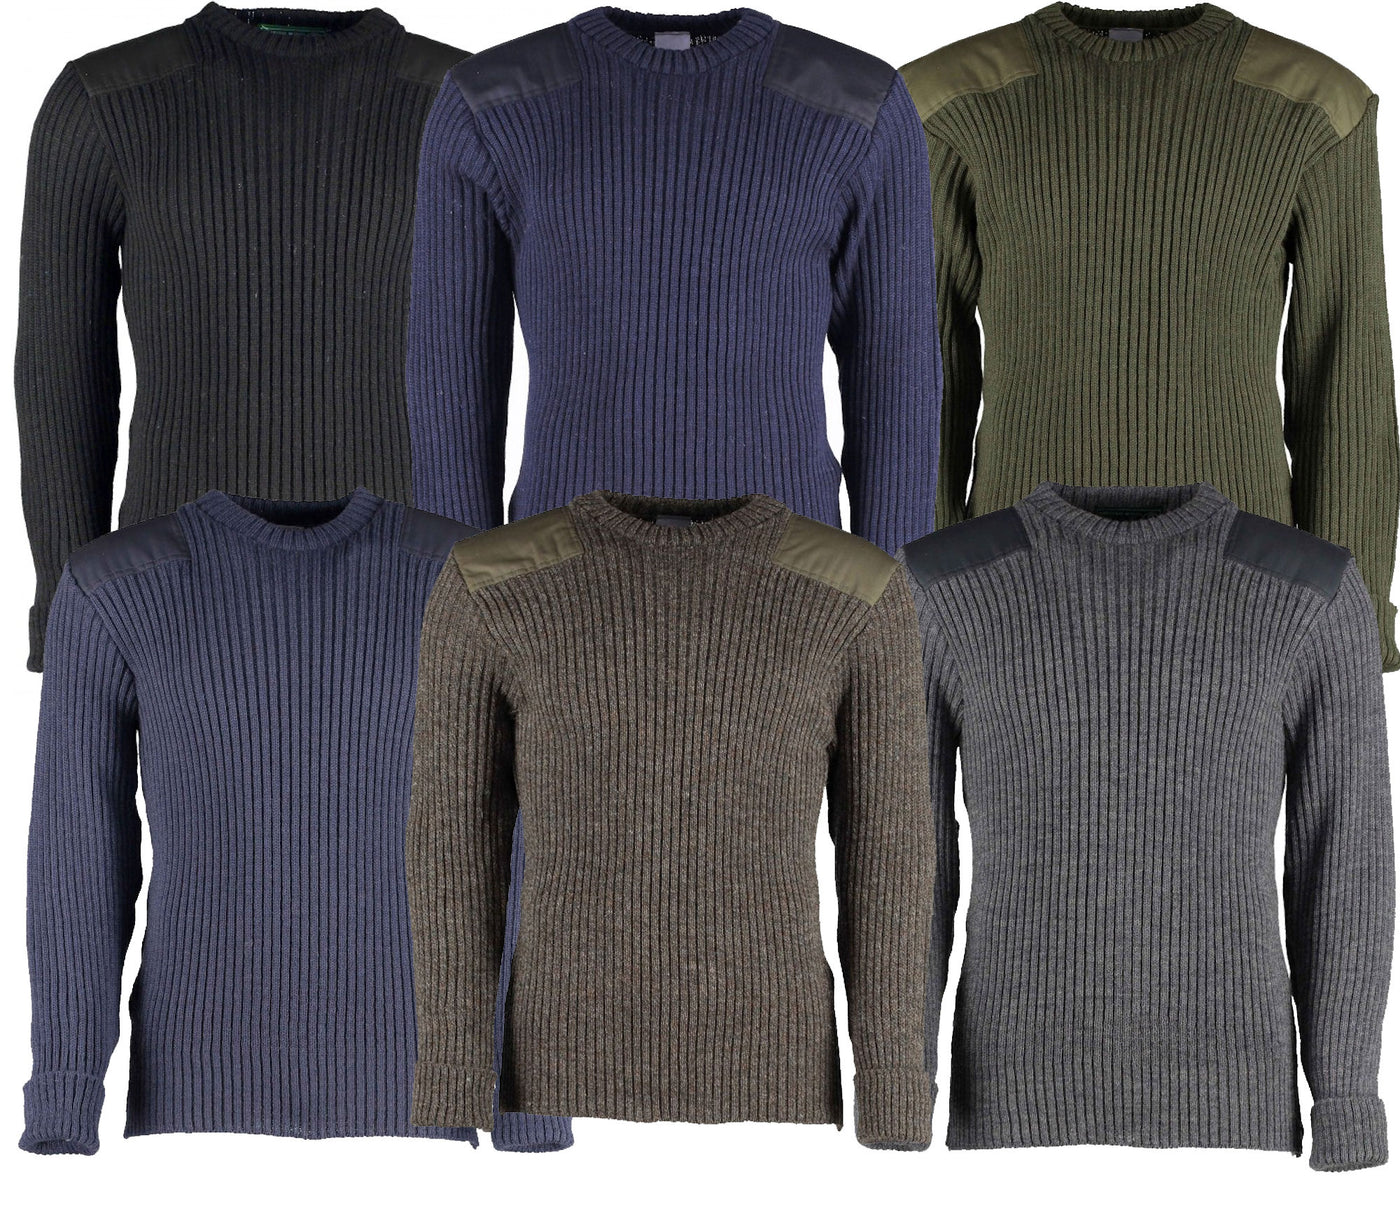 100% British Wool Sweaters - Including the famous Woolly Pully